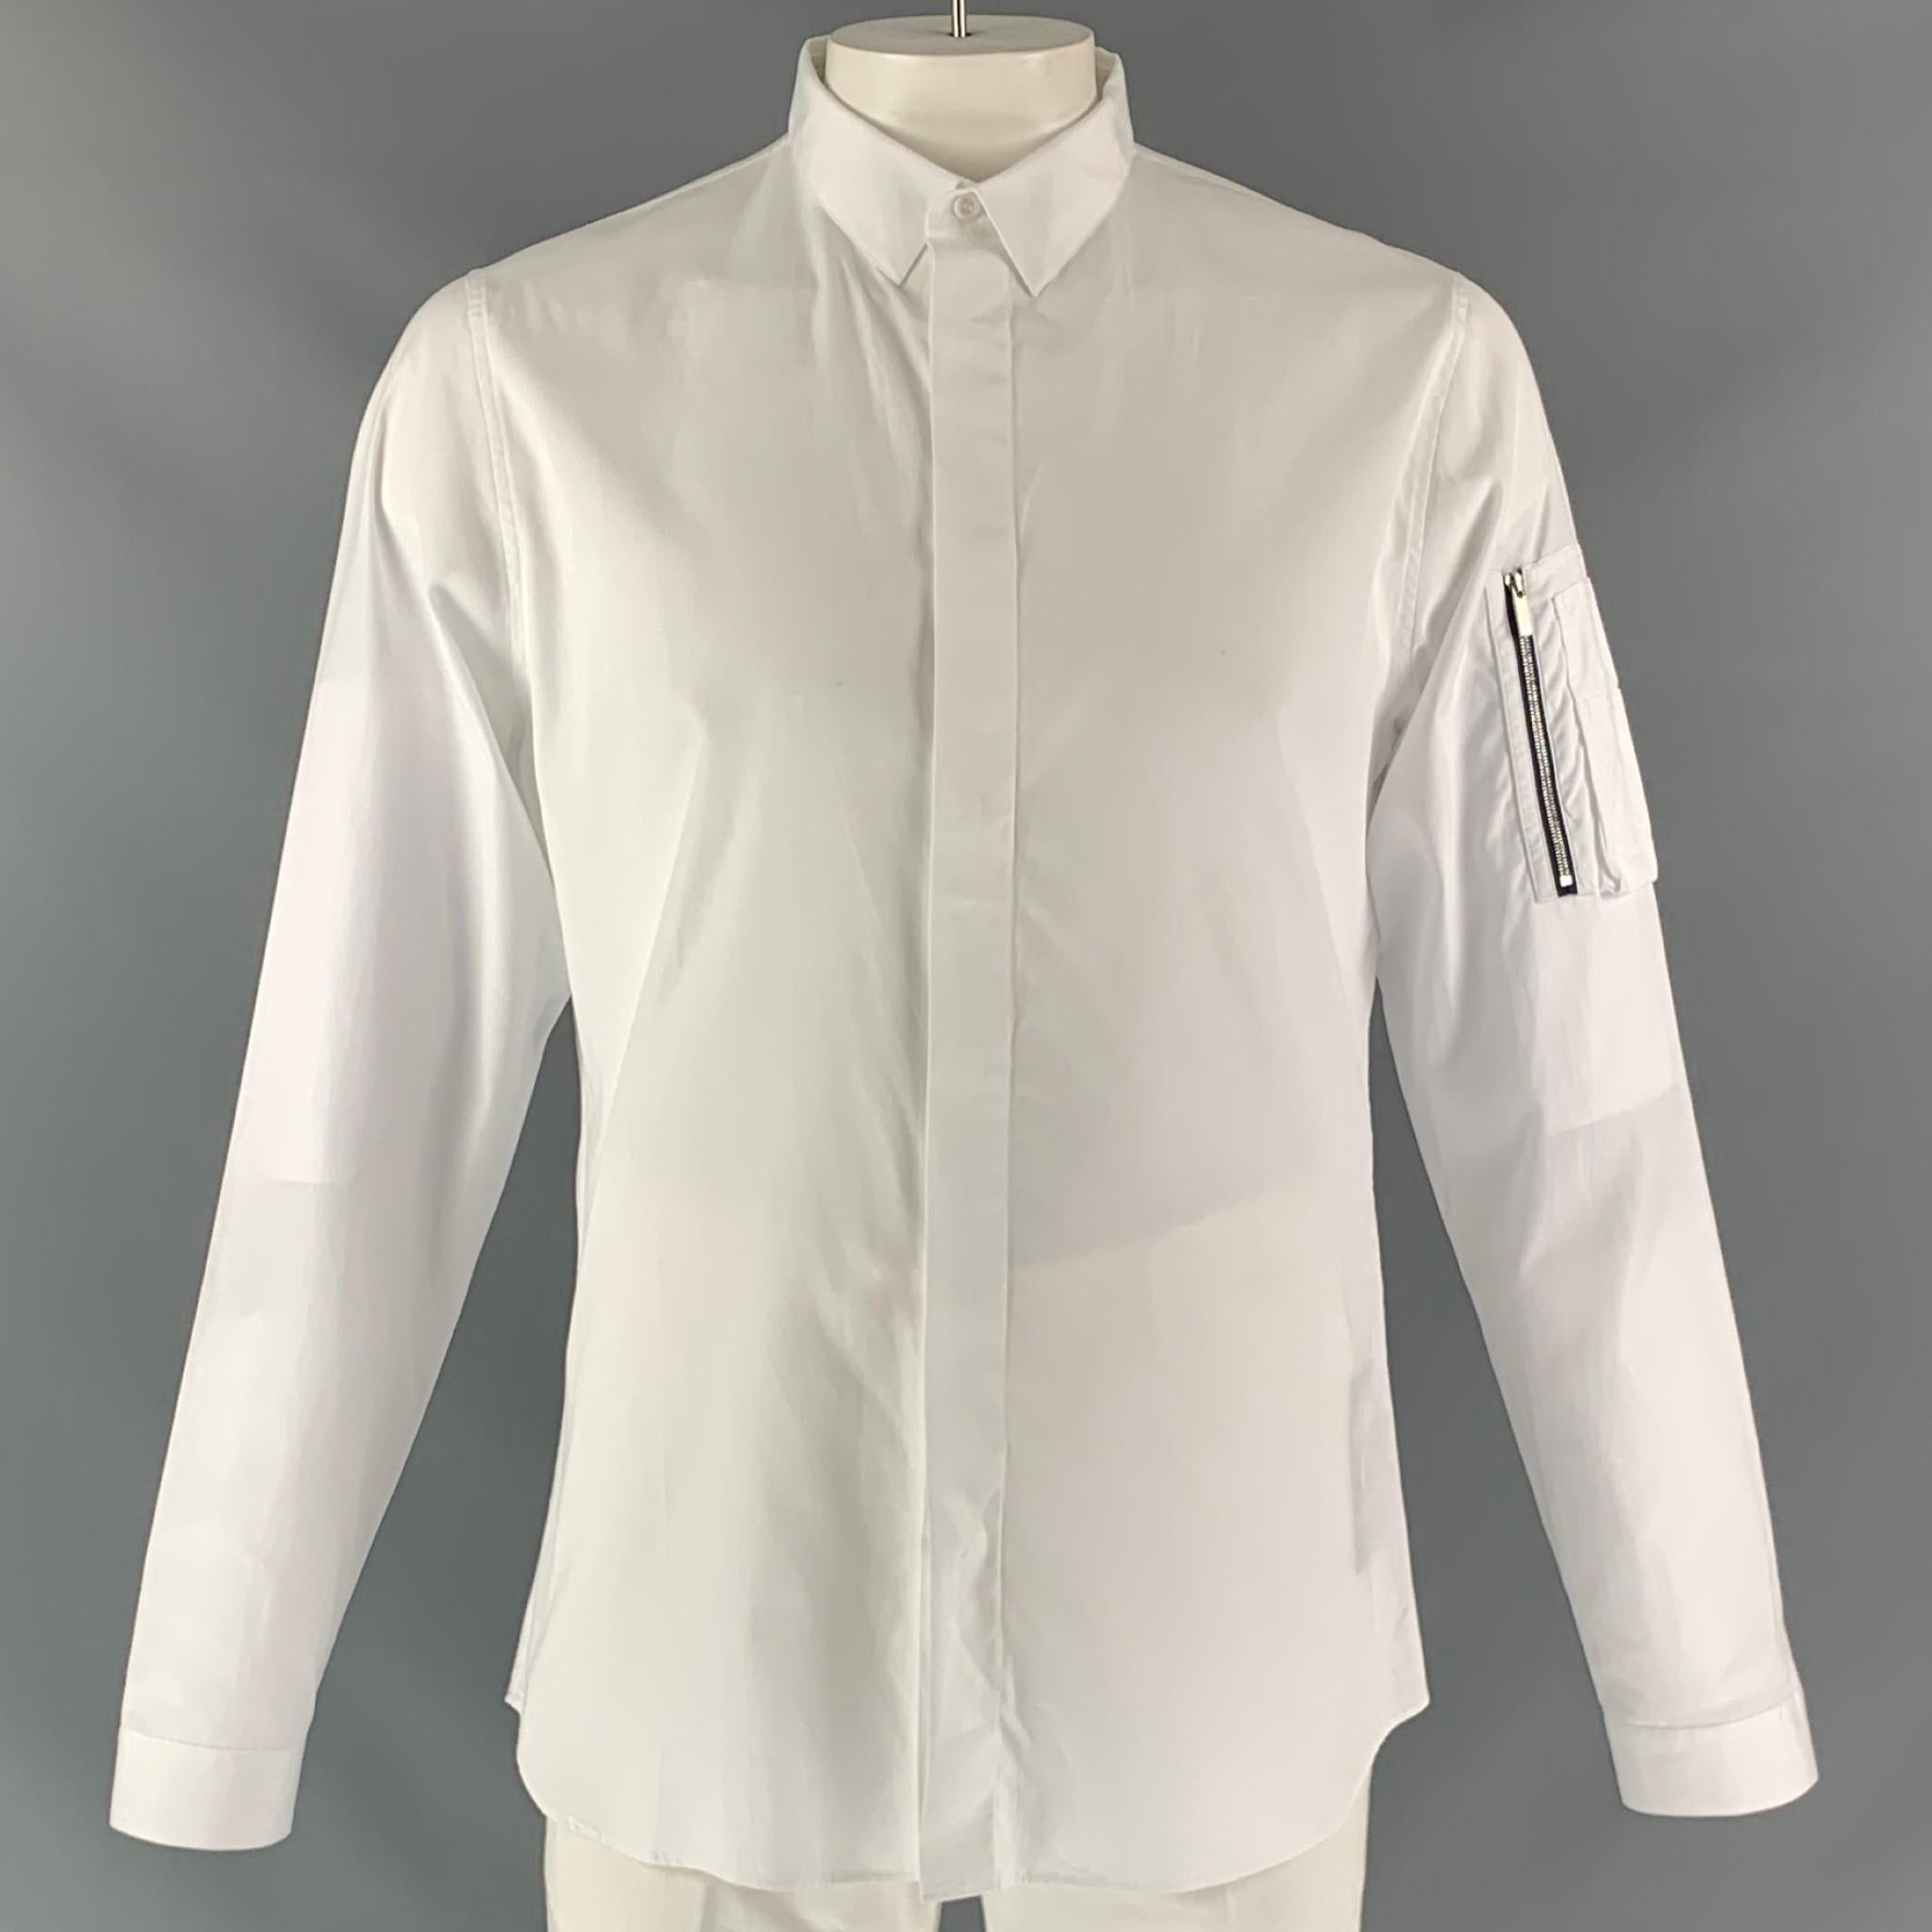 DIOR HOMME long sleeve dress shirt comes in white cotton fabric, button up closure, straight collar, removable collar stays and two button square sleeve cuff features arm pockets. Made in Italy.

Excellent Pre-Owned Condition.
Marked: